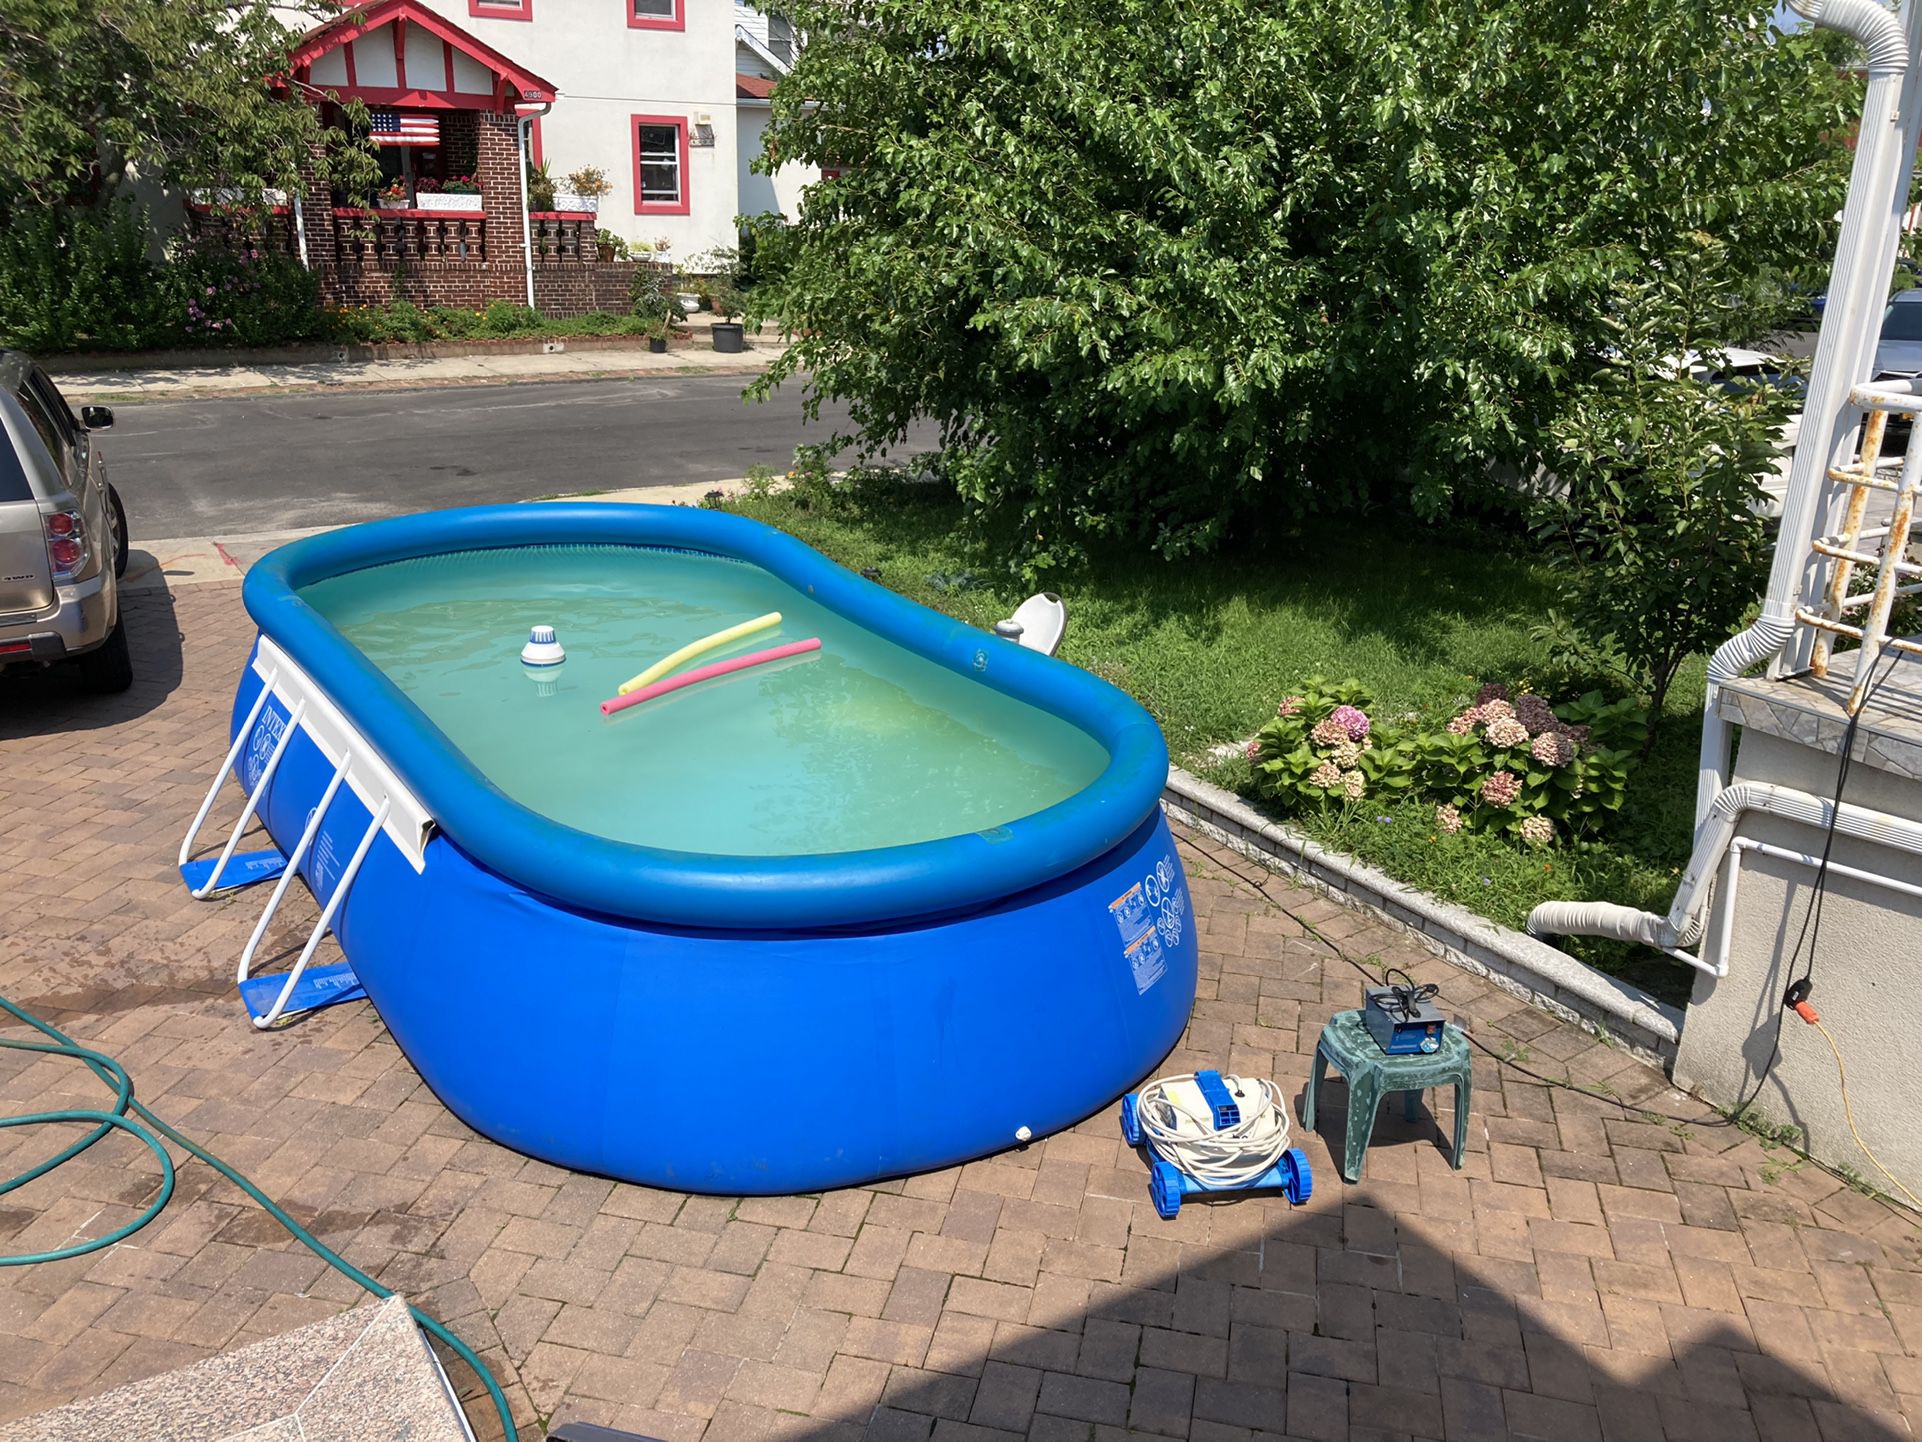 Pool 10x18x45inch,Robot Cleaner,Pump and Filter